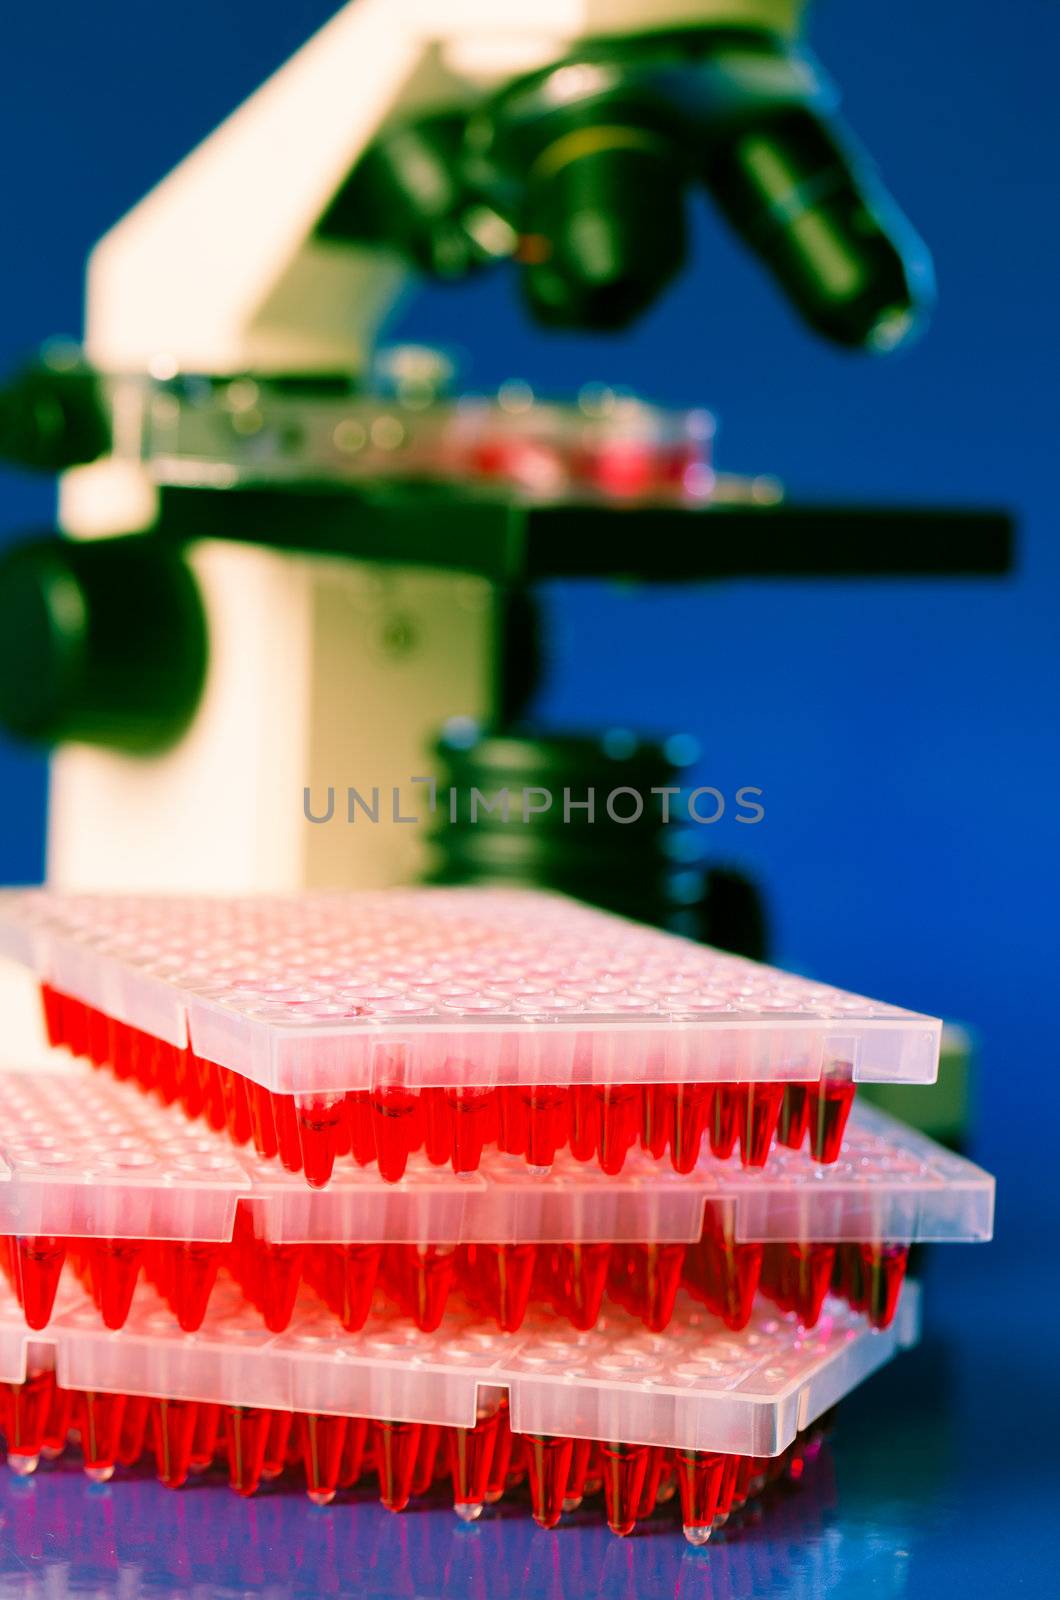 96 well plates on lab table with red liquid samples and microsco by motorolka